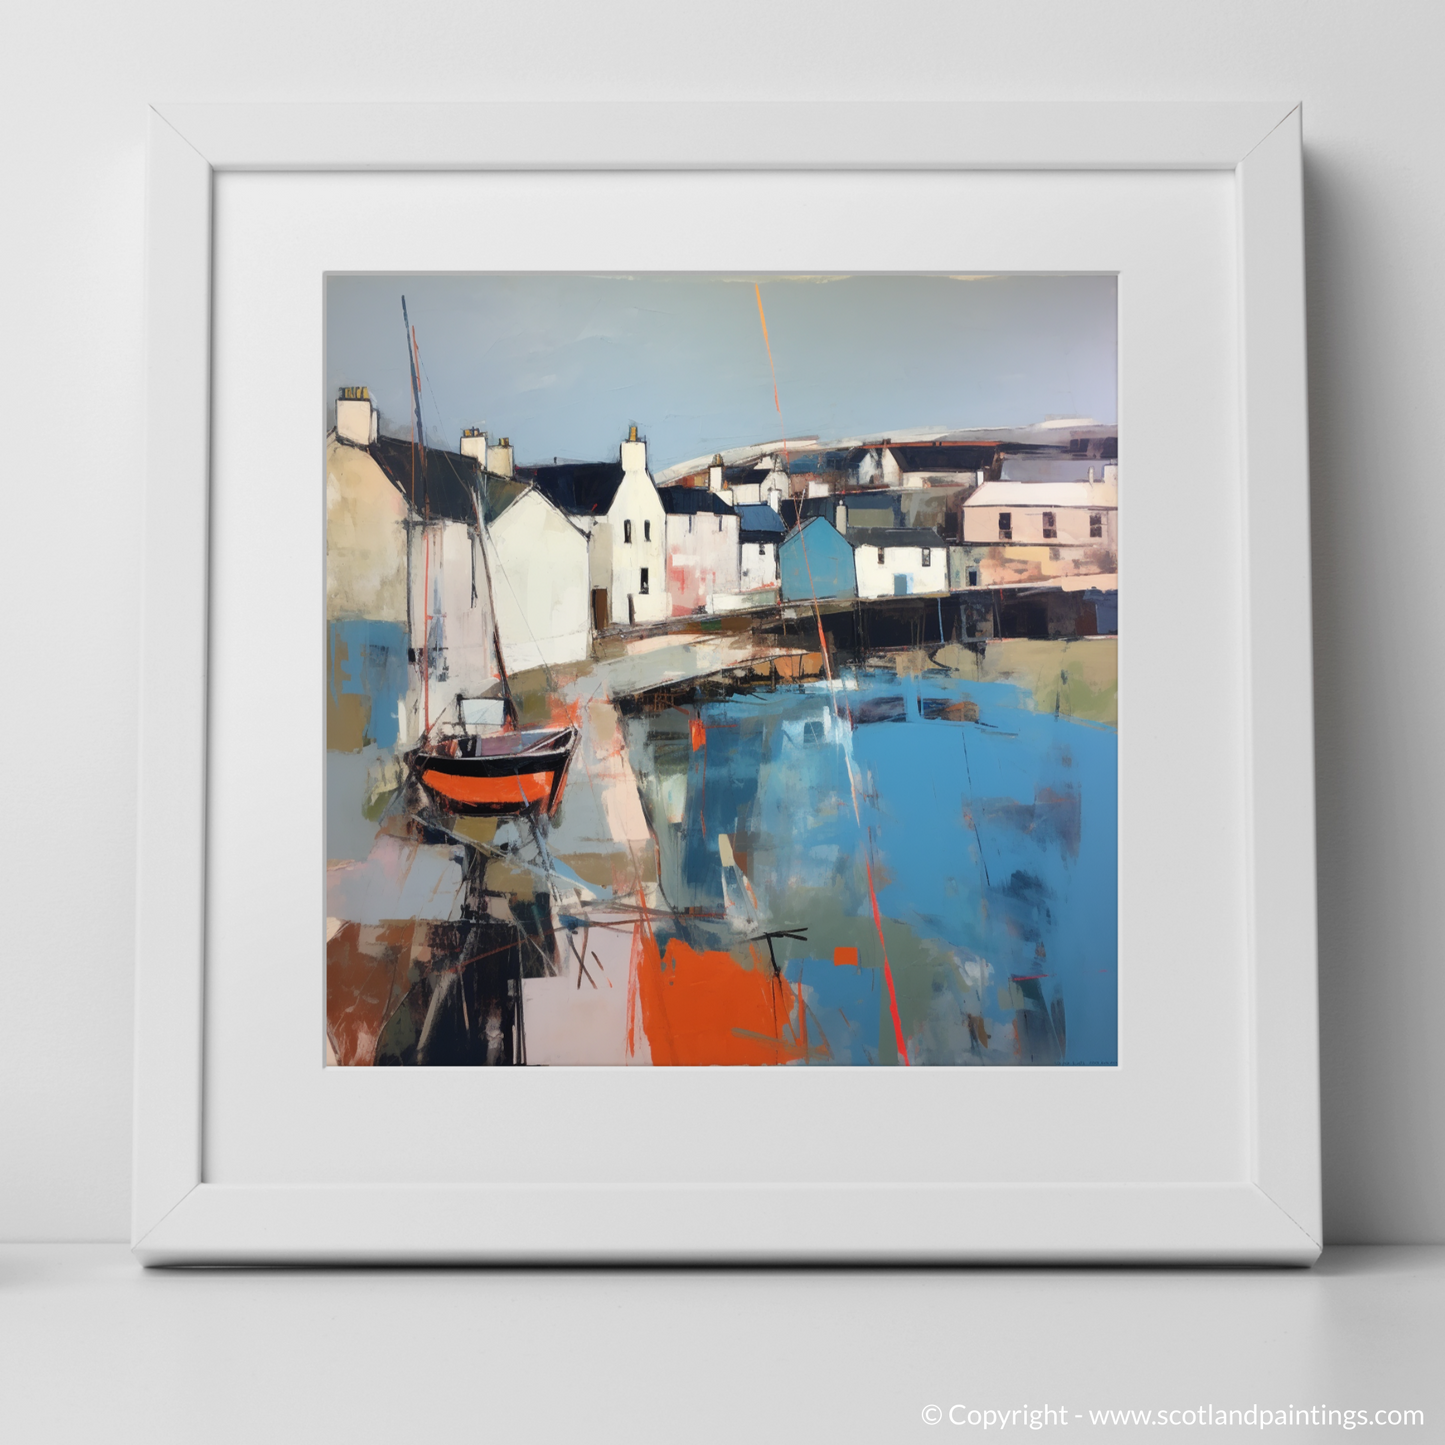 Anstruther Abstracted: A Dance of Scottish Village Colours